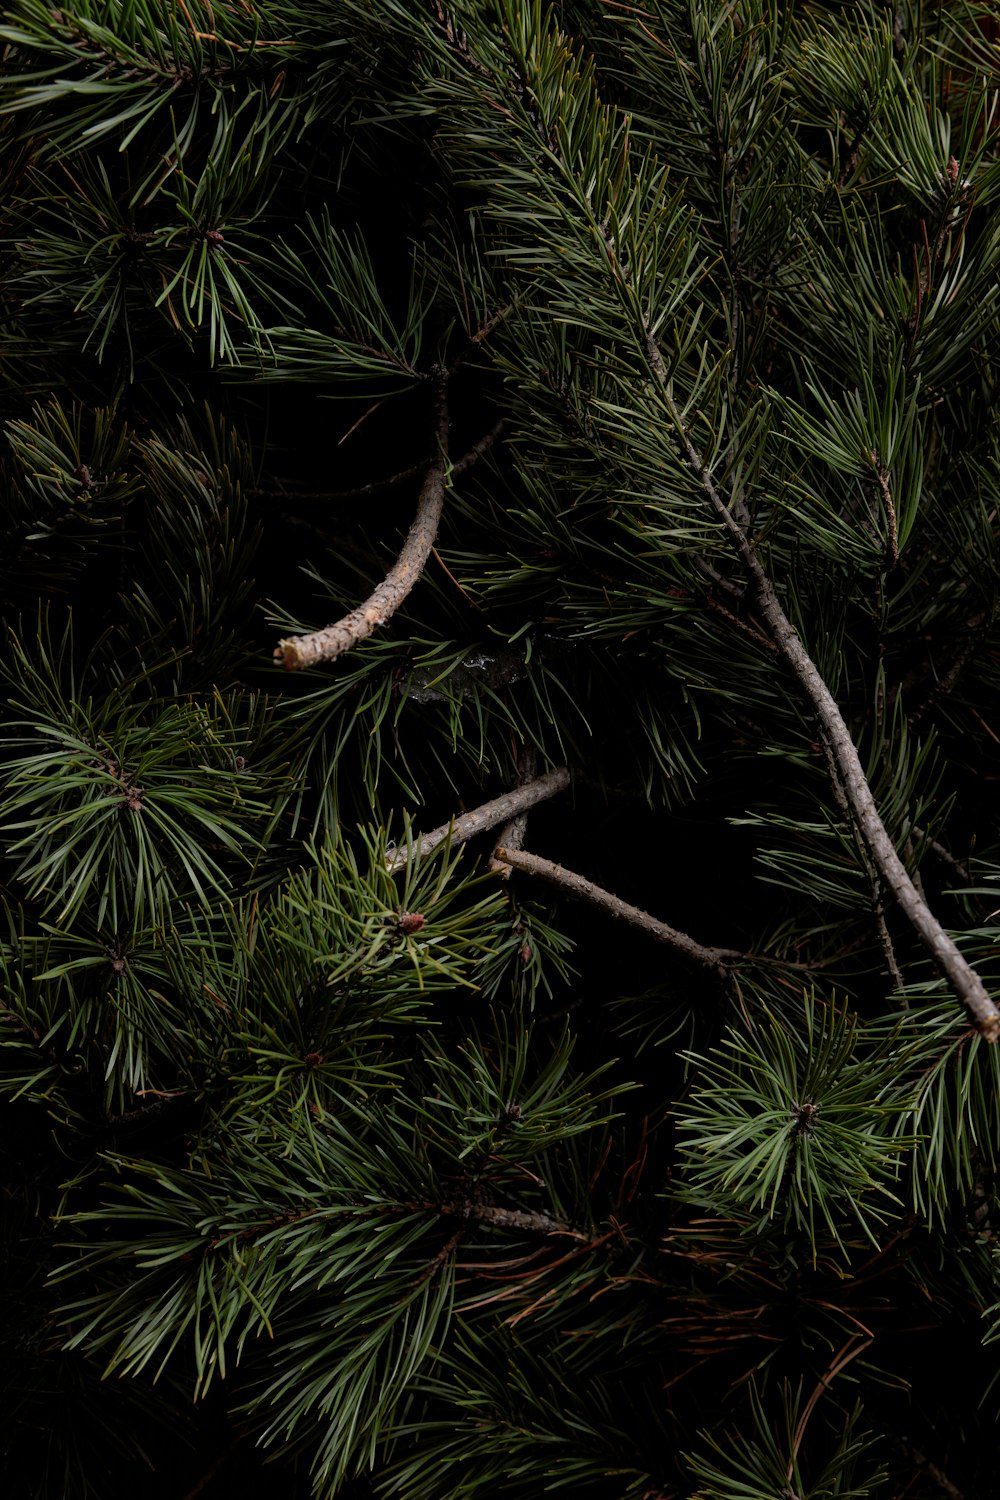 green pine tree with brown stem